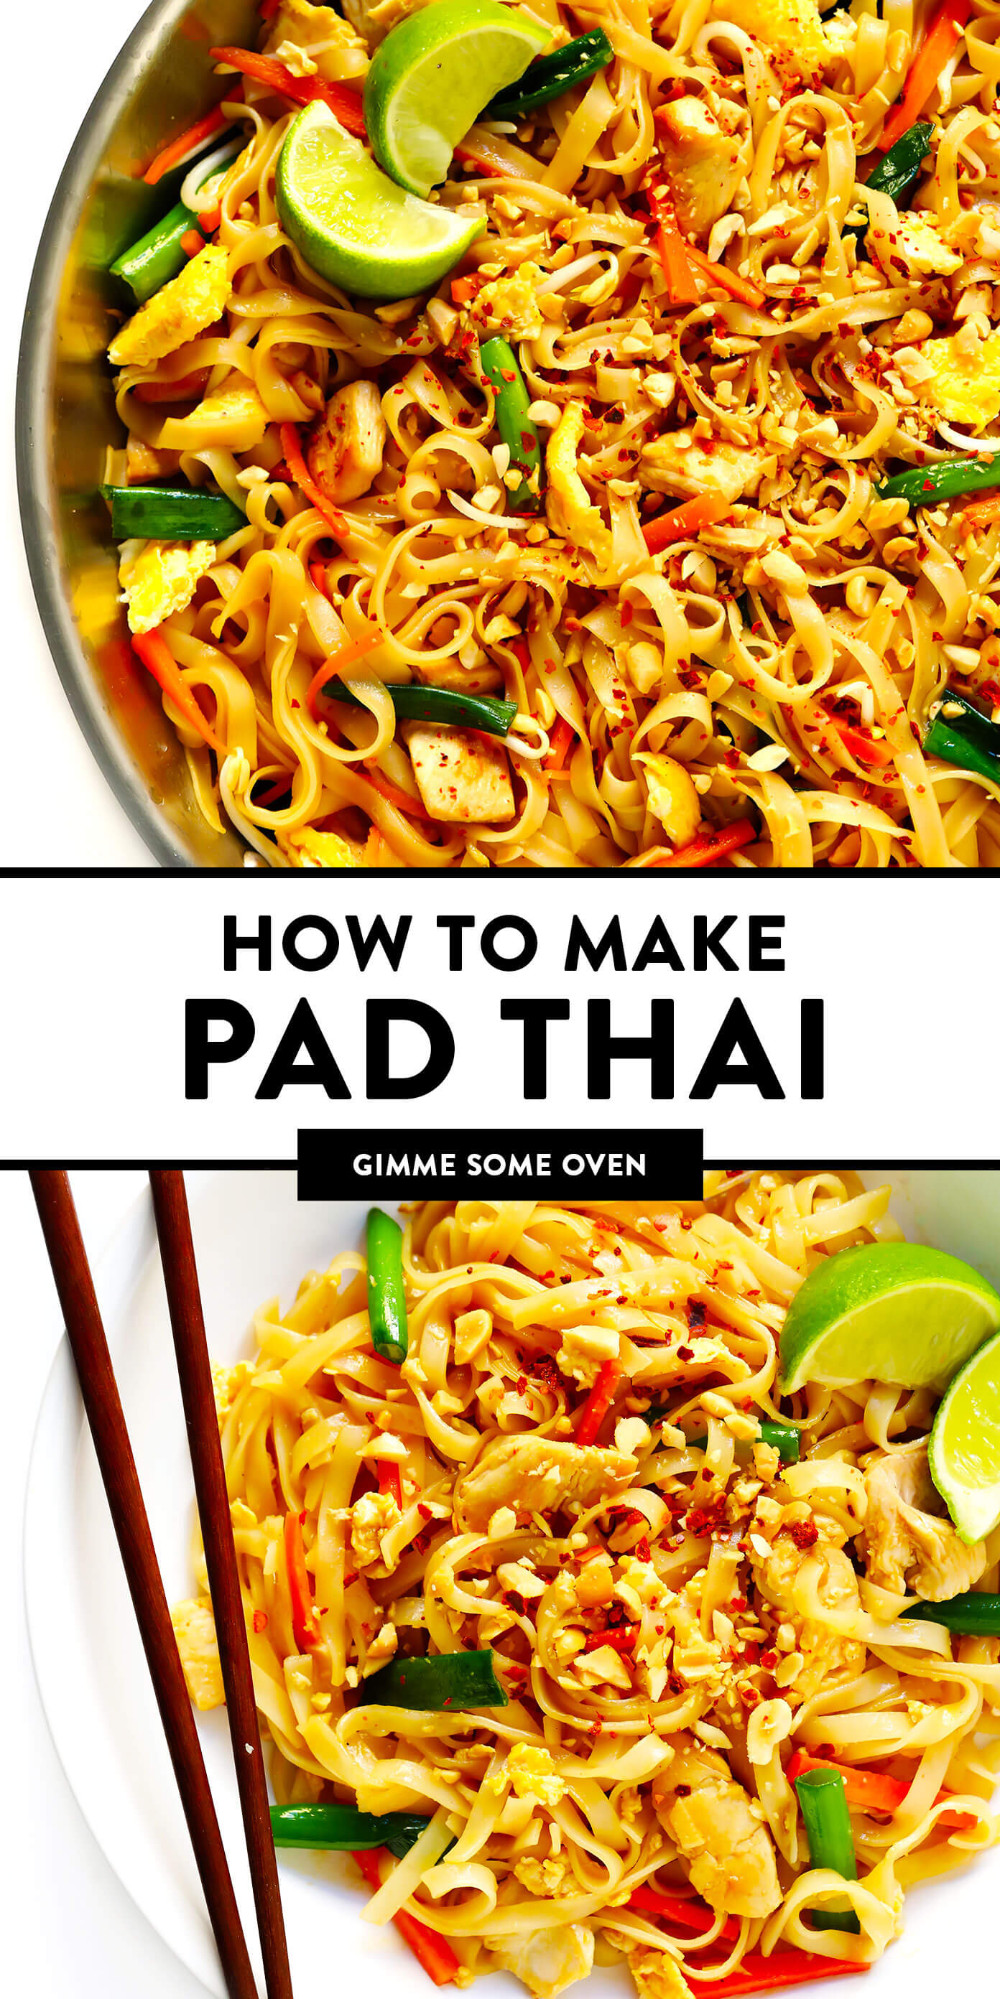 Pad Thai Without Fish Sauce
 Pad Thai Gimme Some Oven Recipe